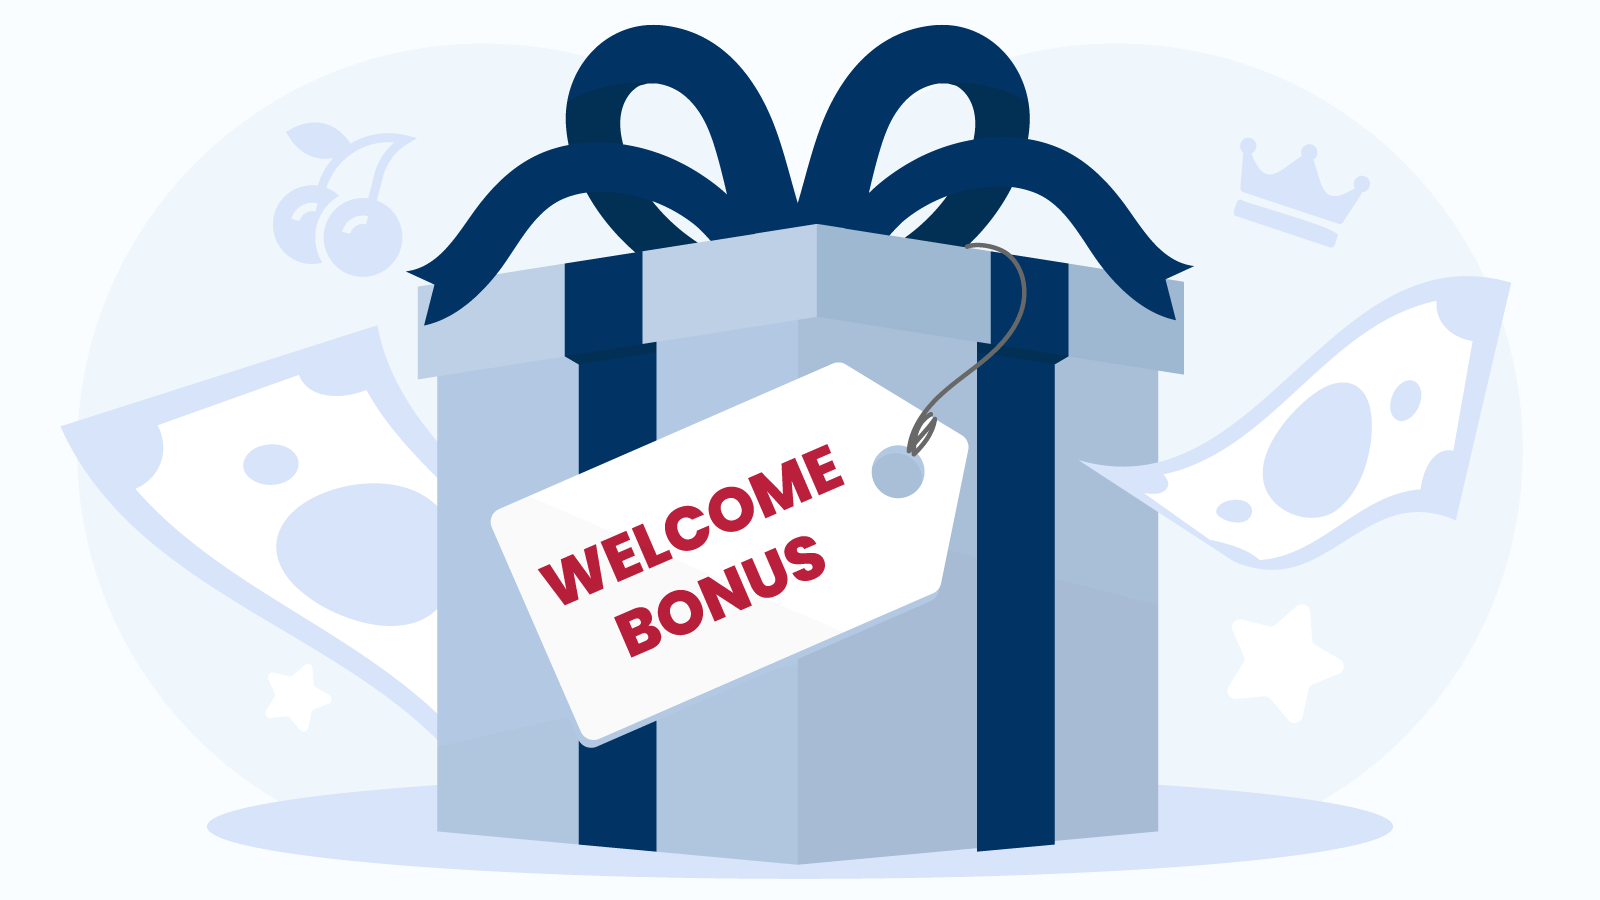 What is a Casino Welcome Bonus?